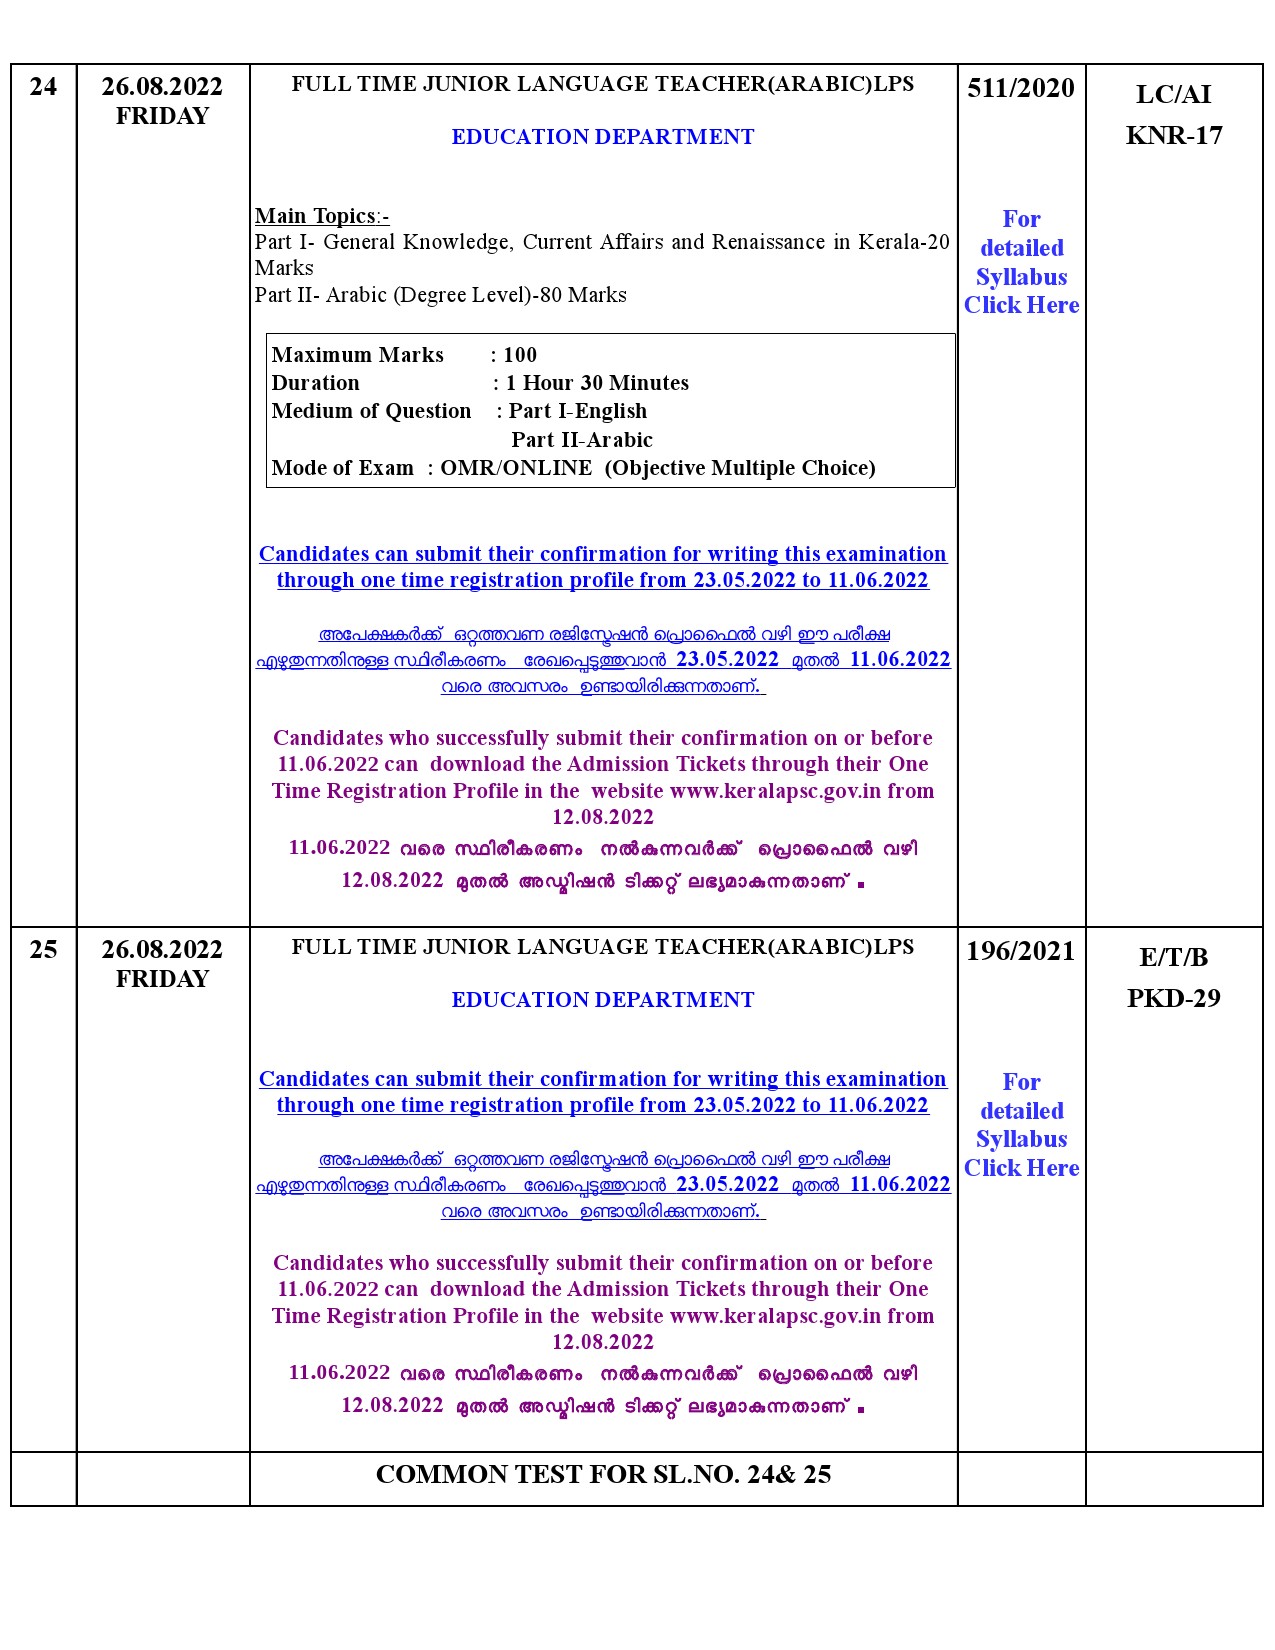 KPSC EXAMINATION PROGRAMME FOR THE MONTH OF AUGUST 2022 - Notification Image 14